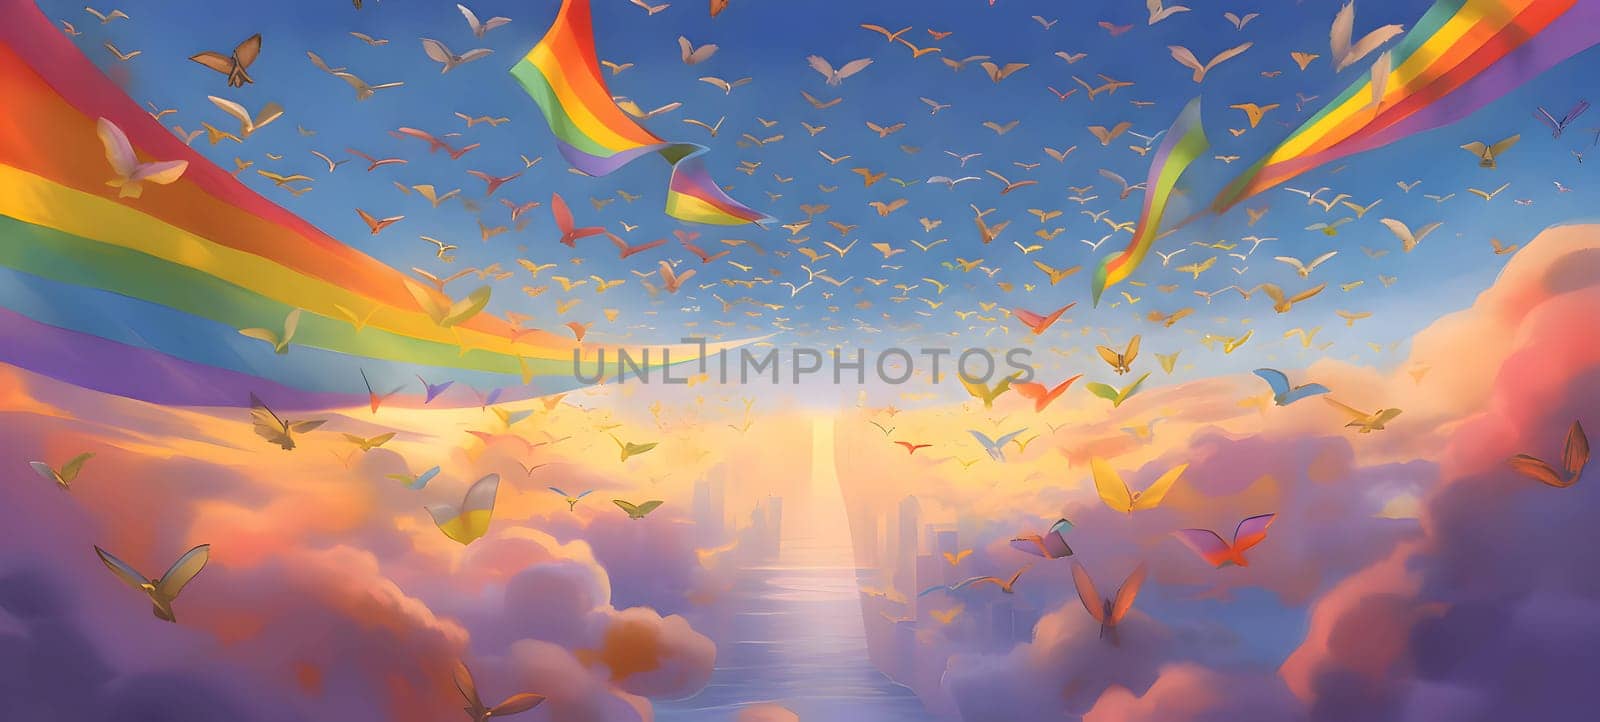 The sky is adorned with the vibrant LGBT rainbow colors, while peaceful pigeons soar in the background, representing freedom and diversity.